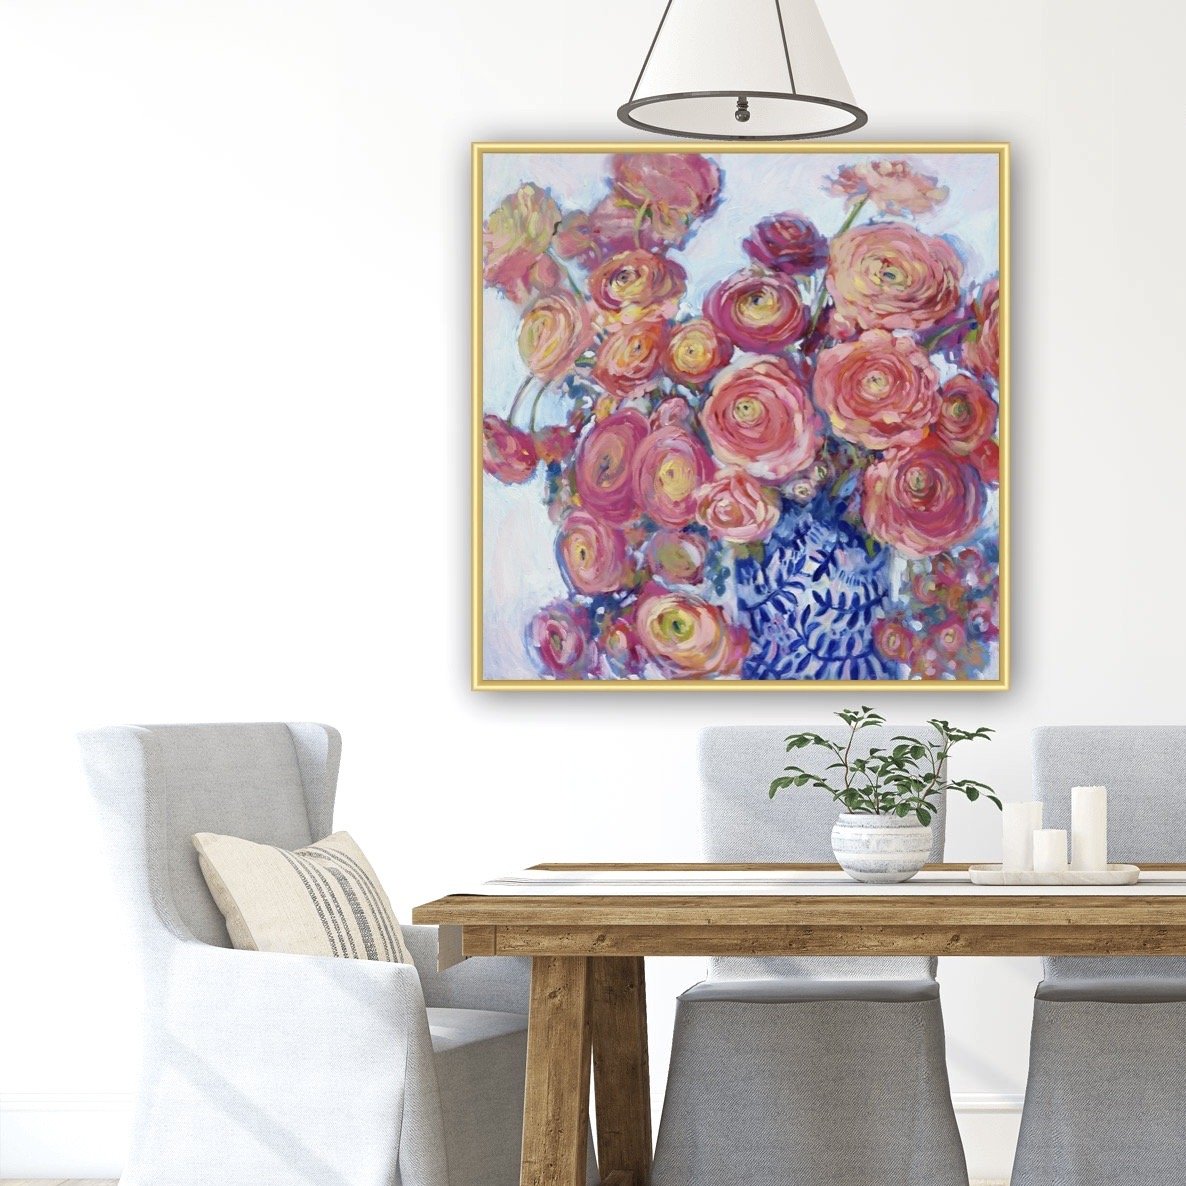 Petals-dining-table-KatiePodracky-chinoiserie-vase-blue-white-rose-abstract-floral-original-art-oil-painting.JPG